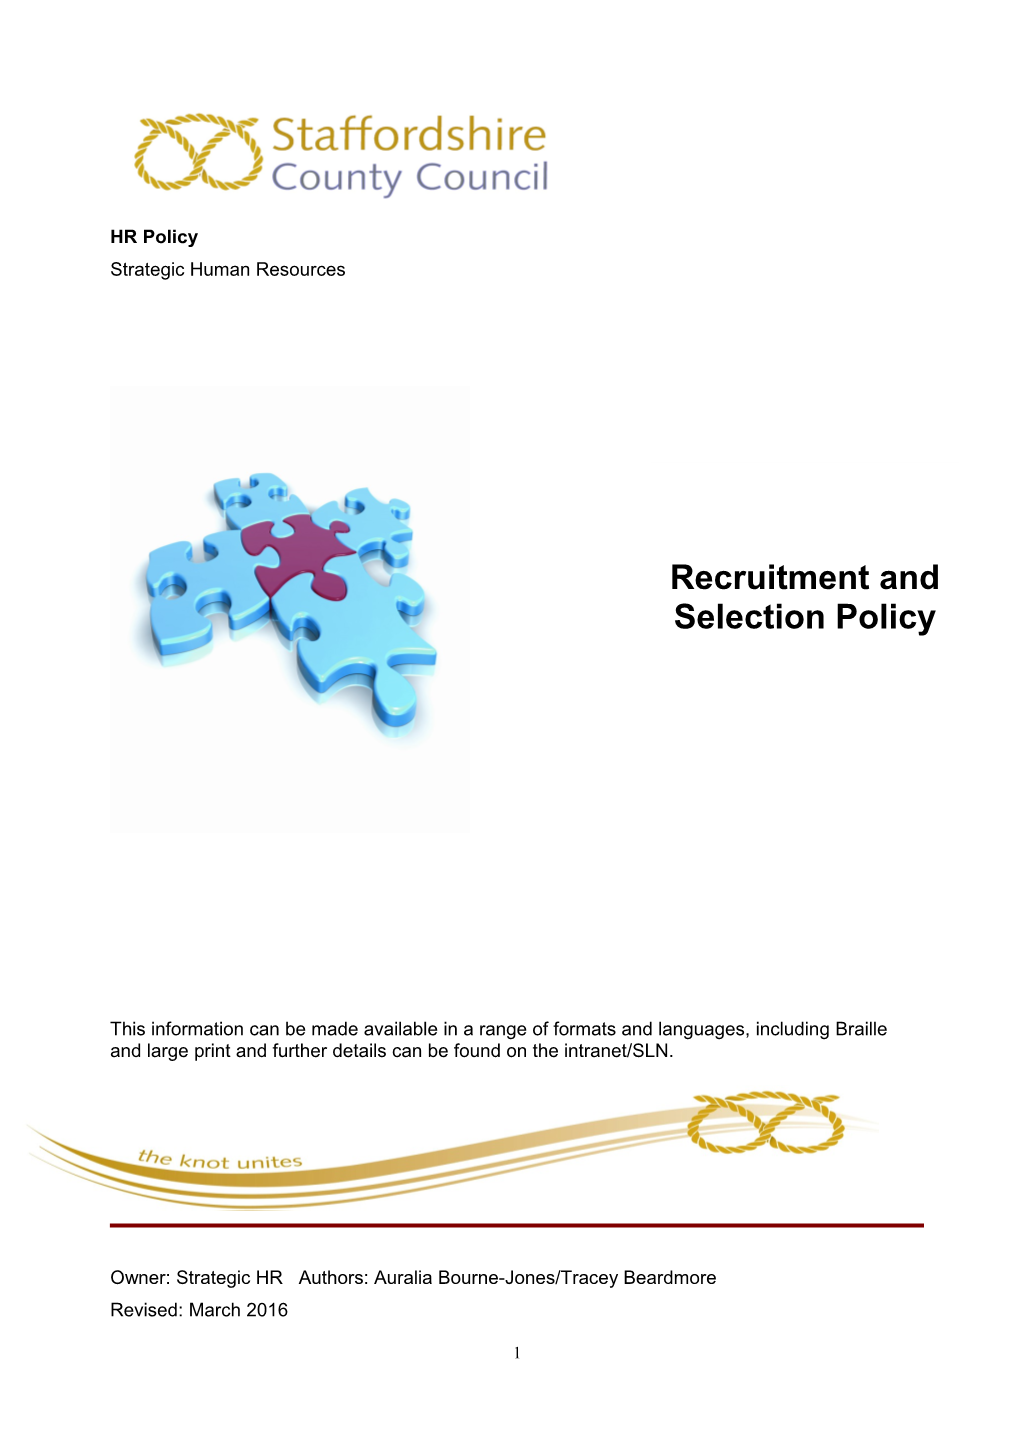 Recruitment and Selection Policy - April 2016